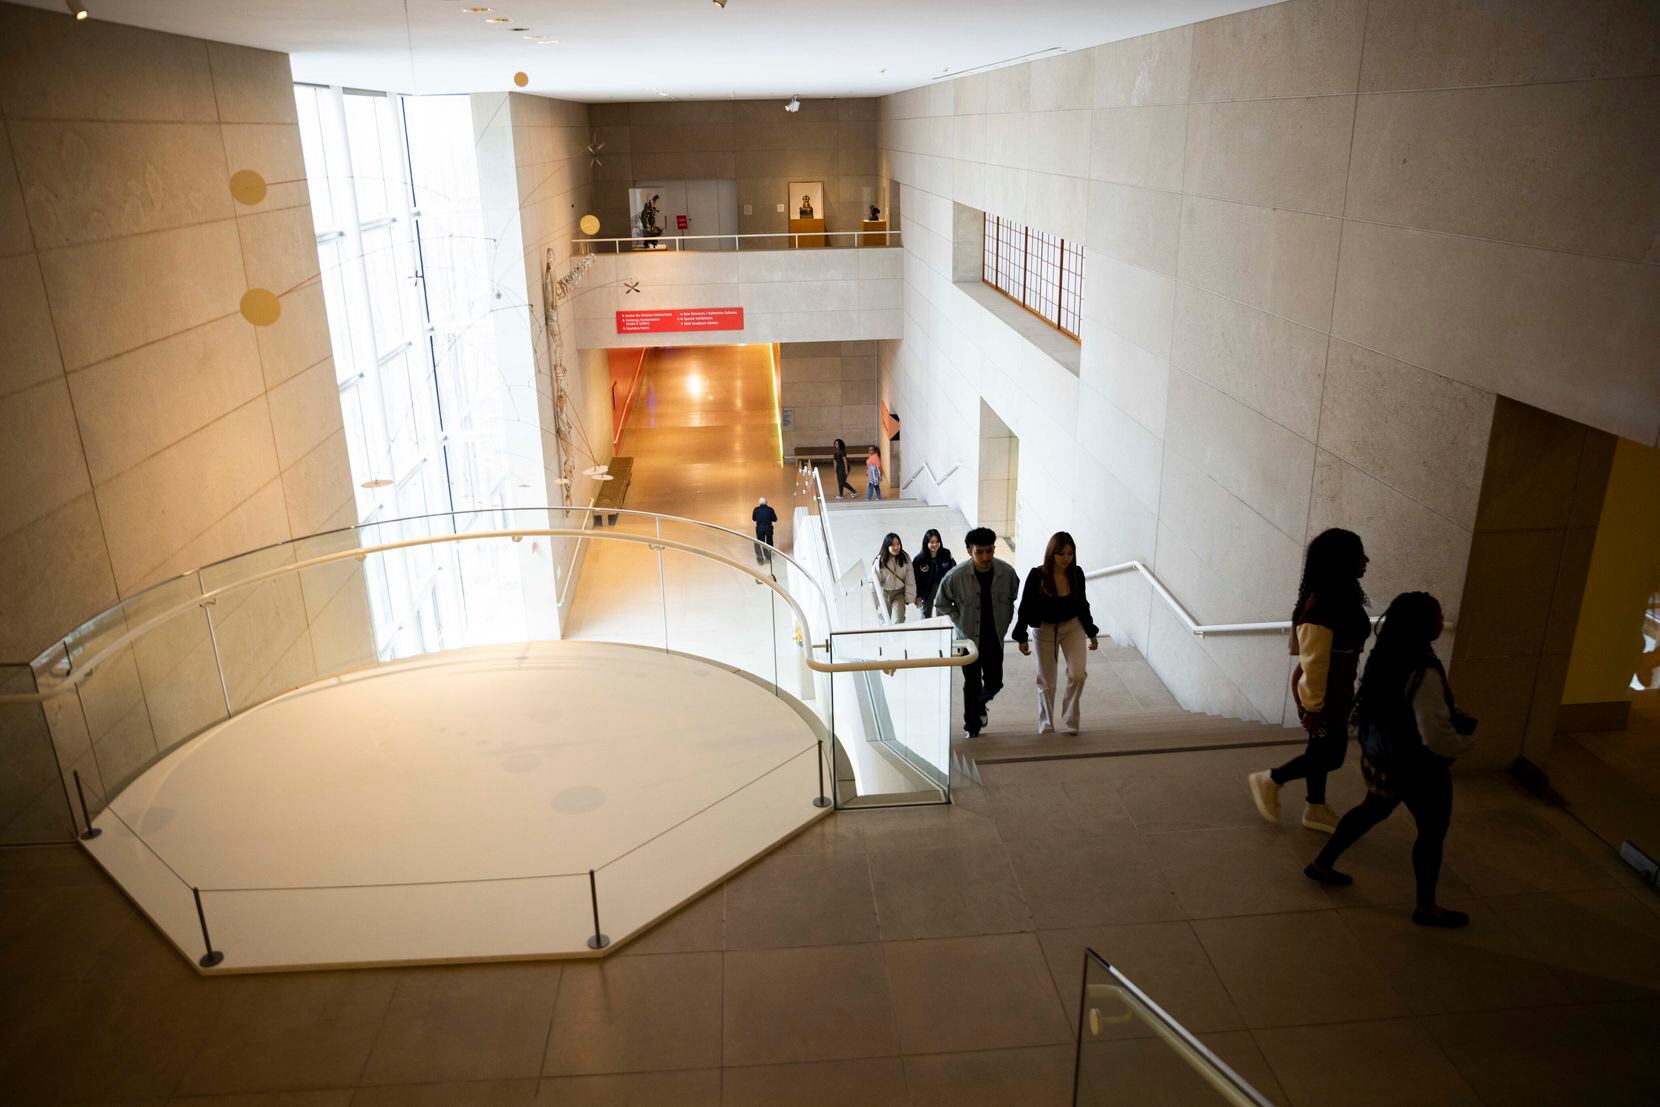 "There is still much to love about the DMA in its current state," writes Lamster. "For the...